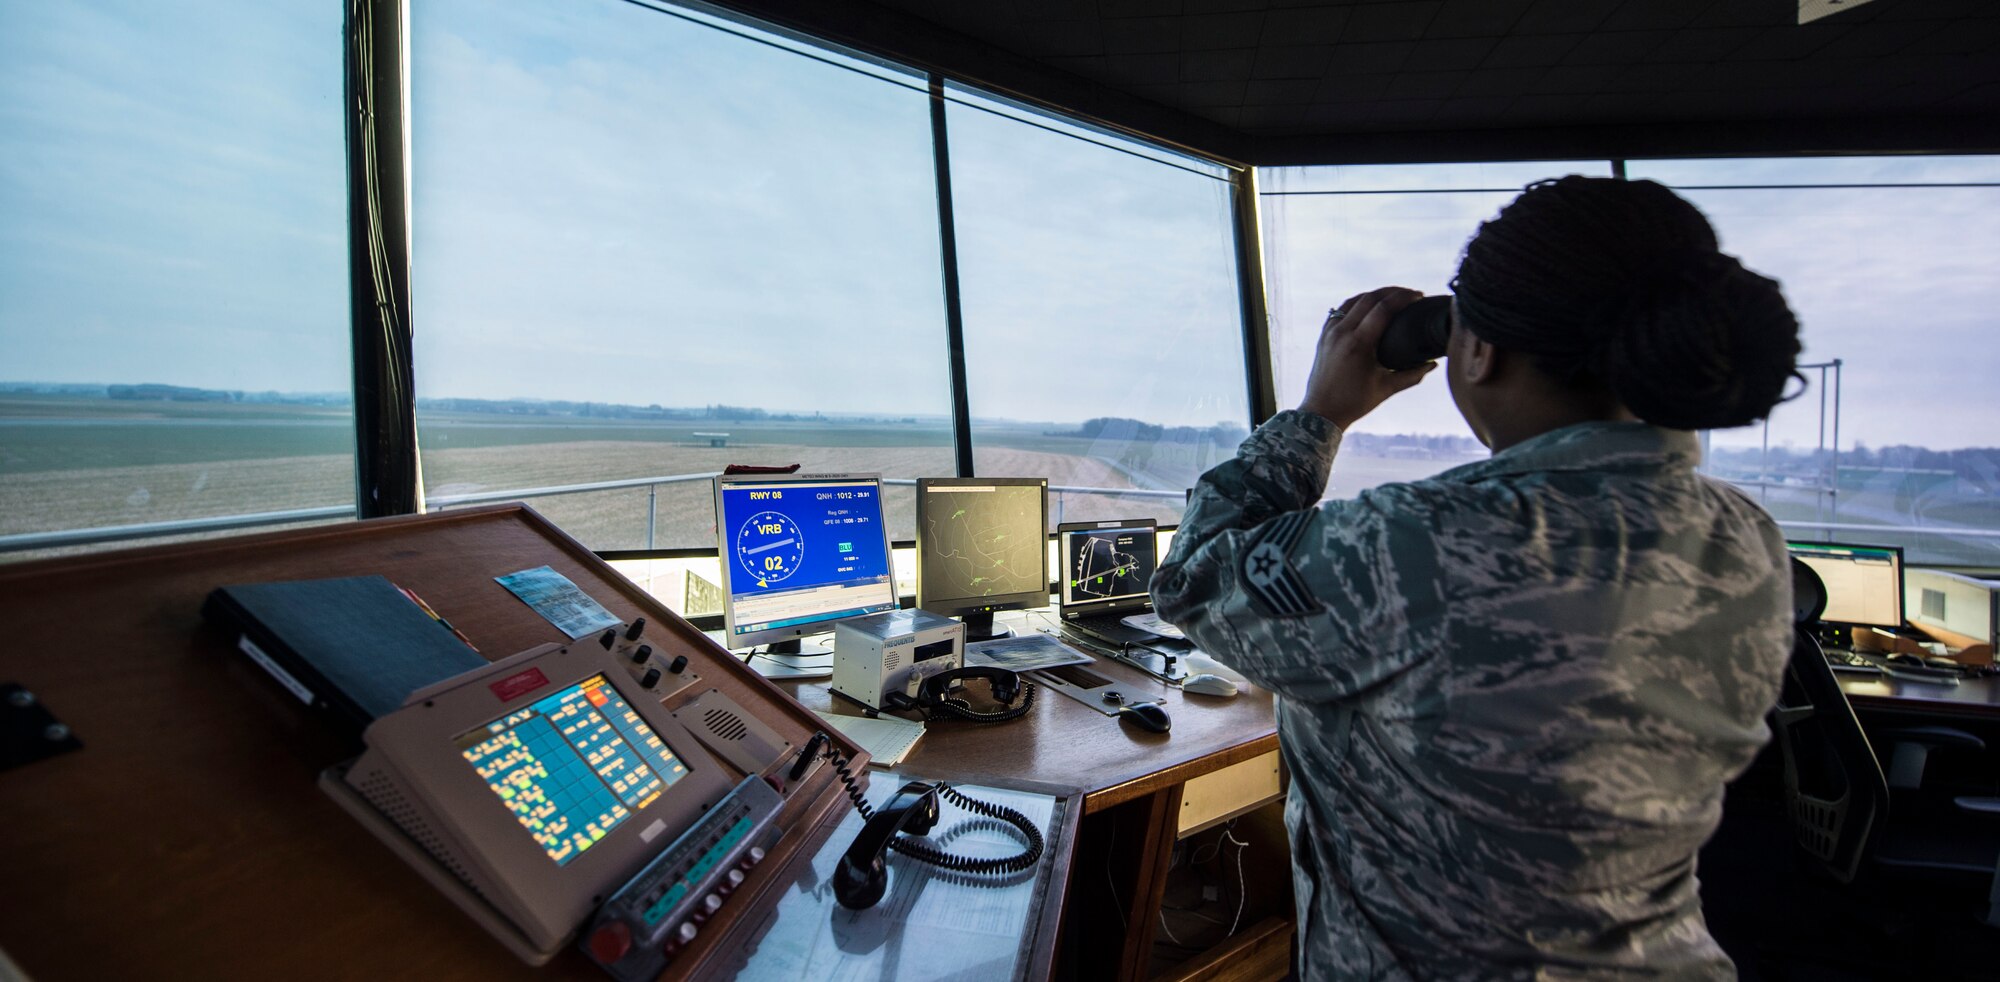 Staff Sgt. Nicole Walker, 424th Air Base Squadron air traffic controller, peers out the Chievres Air Base tower at Chièvres Air Base, Belgium, Feb. 26, 2016. The 424th ABS operates the airfield and runways at Chievres while providing support to the Supreme Allied Commander Europe and Supreme Headquarters Allied Powers Europe (SHAPE), NATO transient aircraft and distinguished visitors. (U.S. Air Force photo/Staff Sgt. Sara Keller)